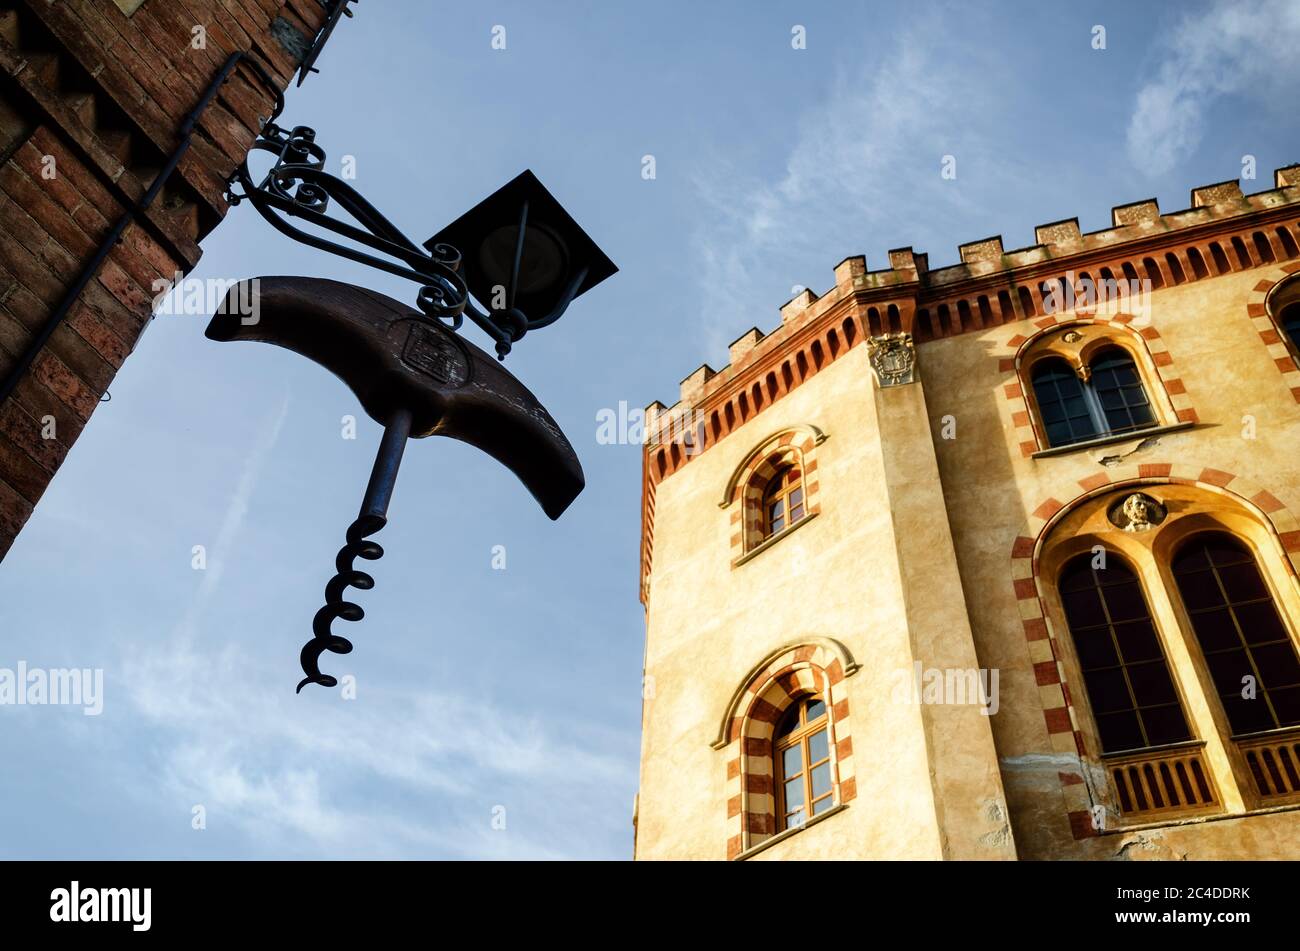 The castle of Barolo (Piedmont, Italy) with a giant wine corkscrew hanging from a town lamp Stock Photo